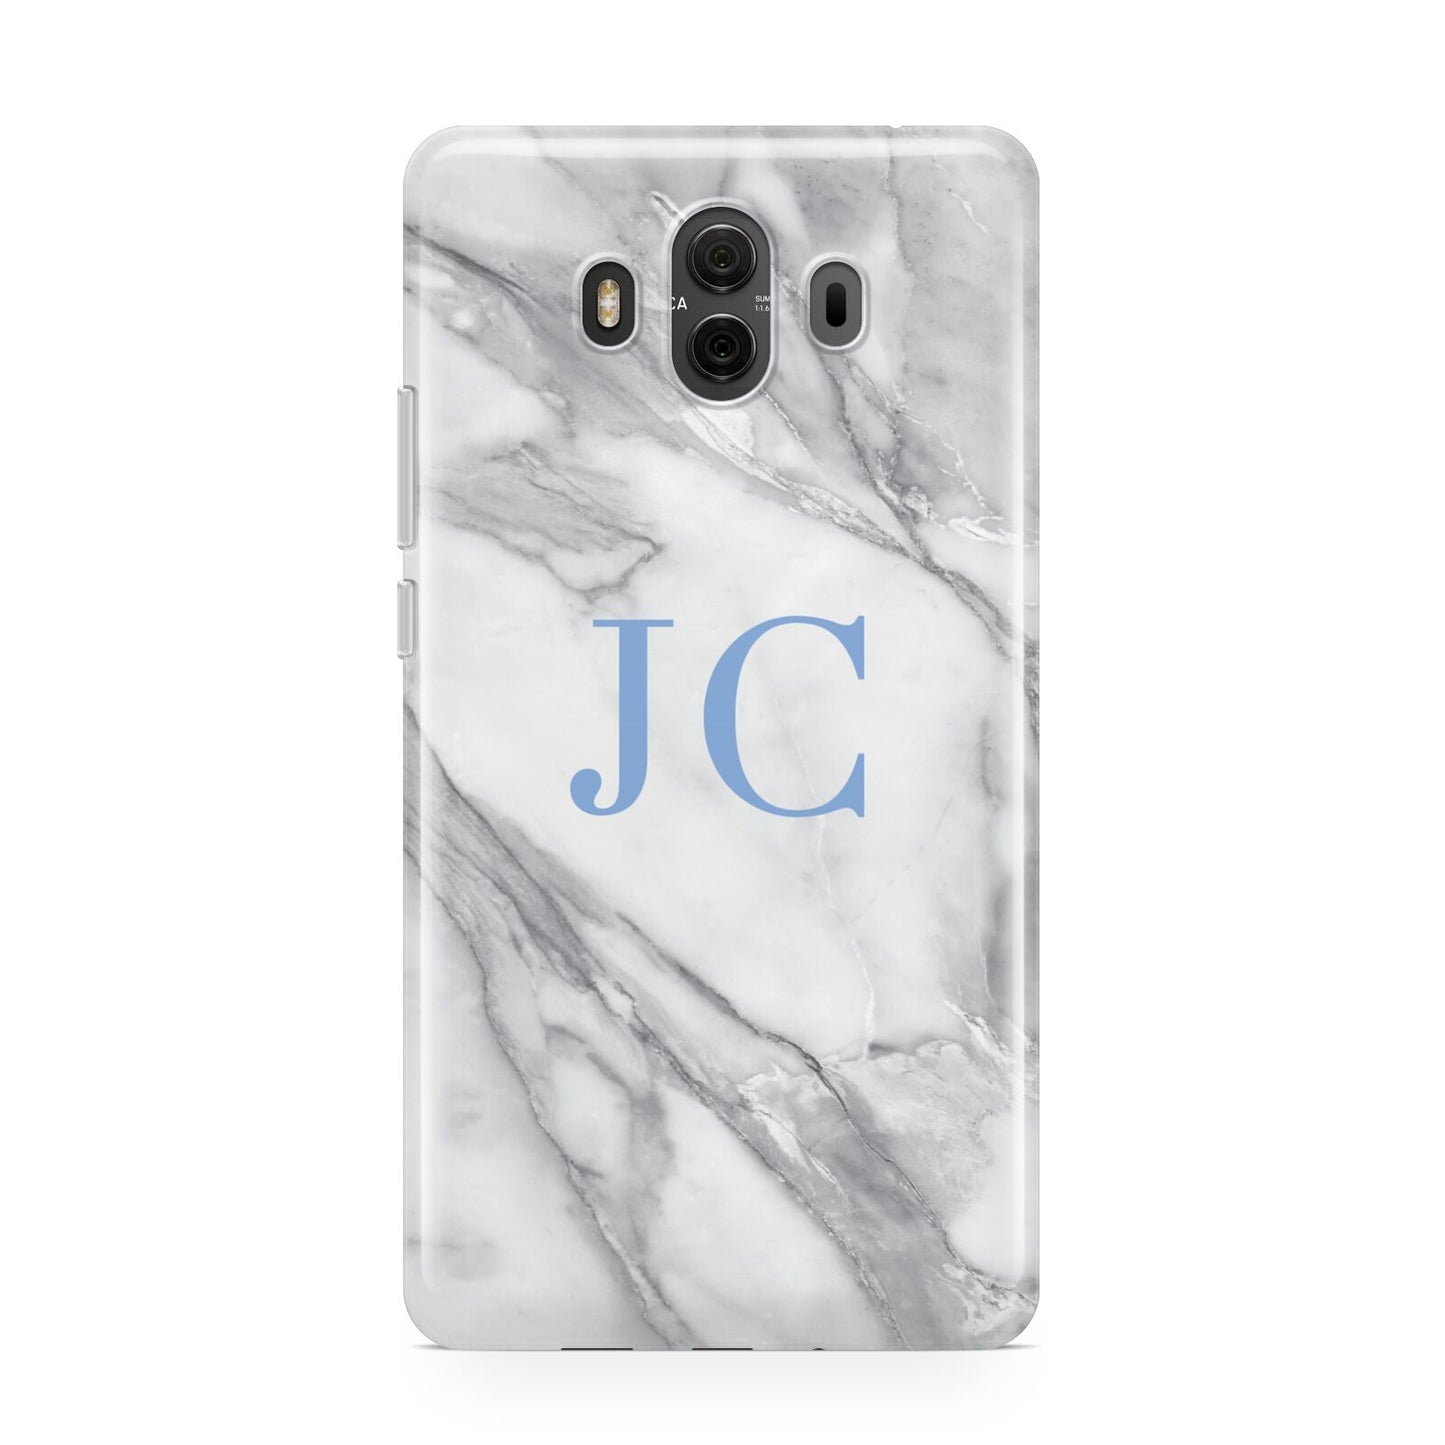 Grey Marble Blue Initials Huawei Mate 10 Protective Phone Case